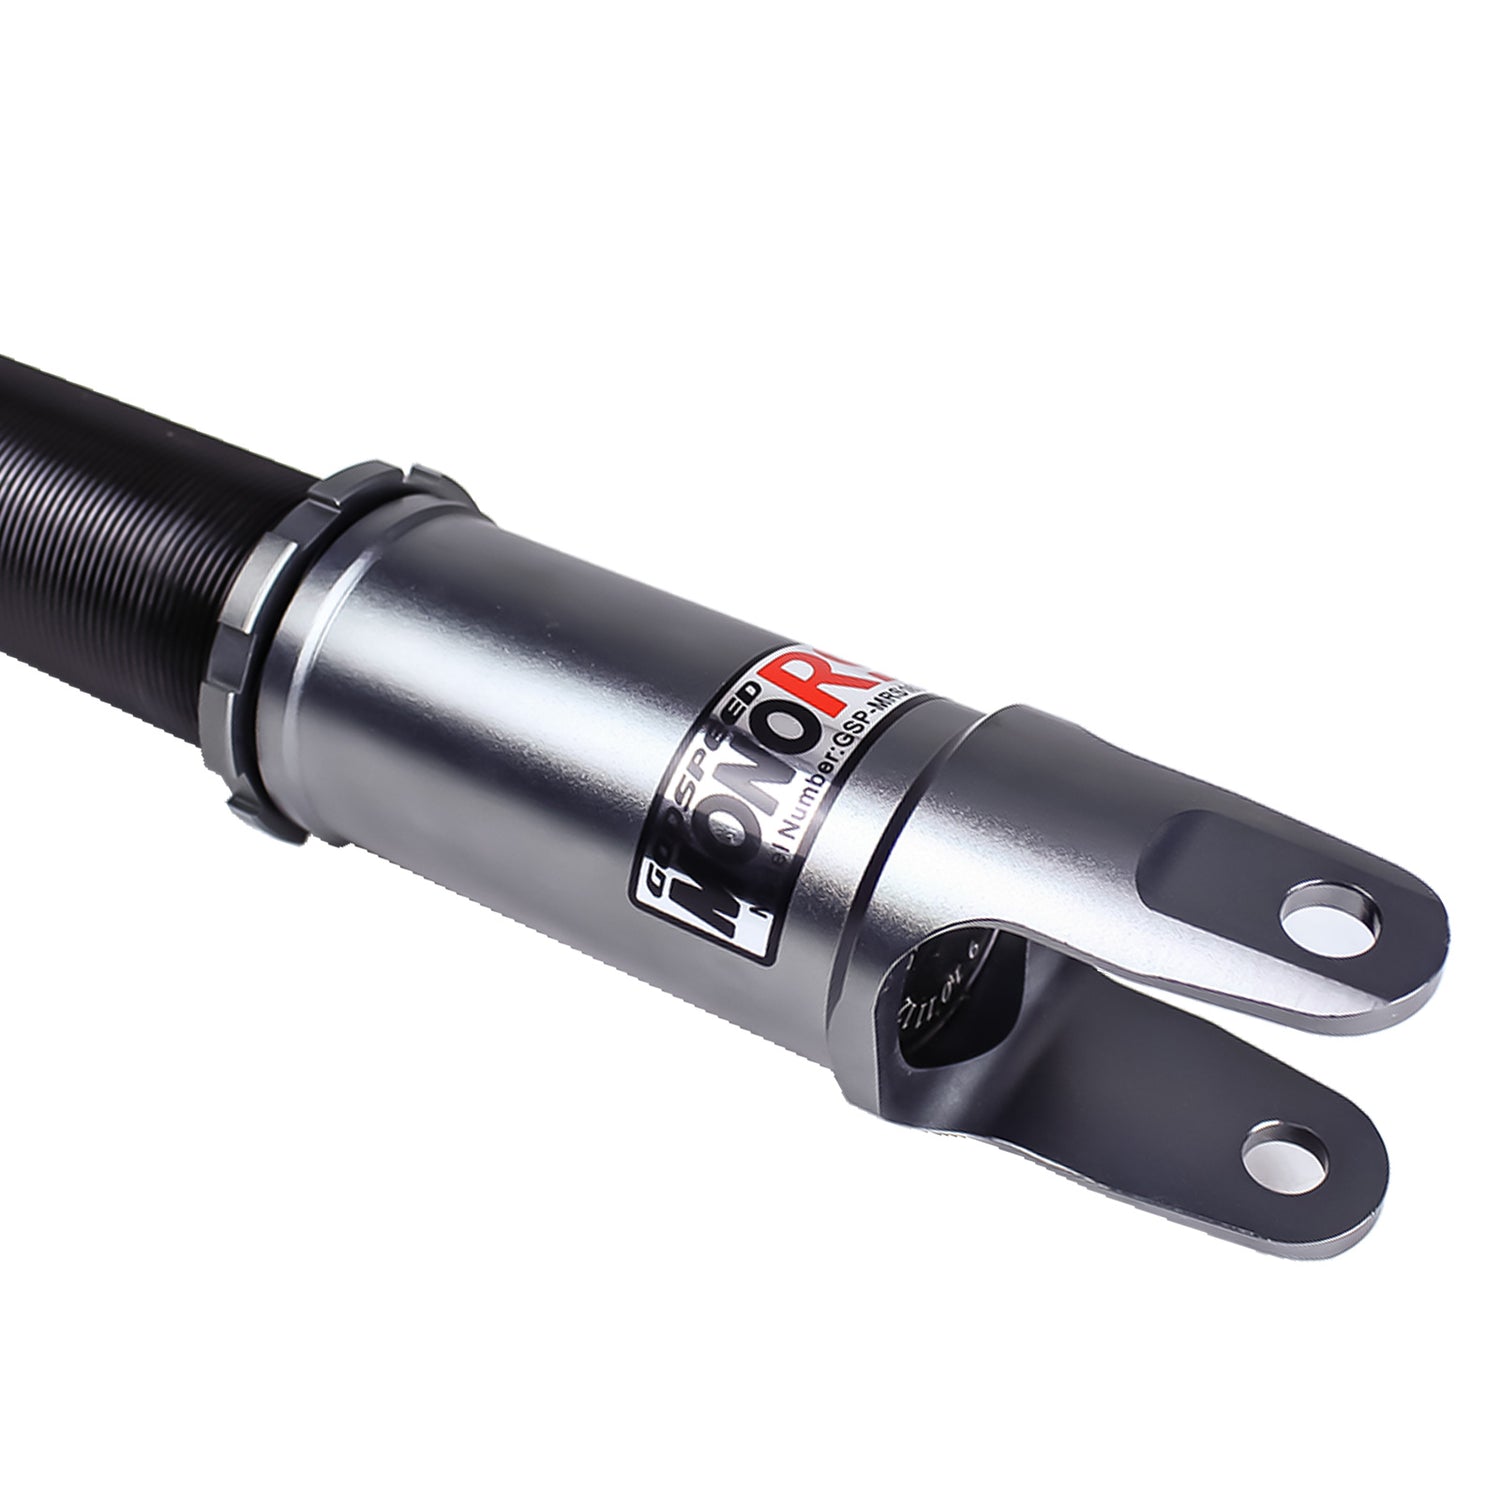 Godspeed MRS1670-A MonoRS Coilover Lowering Kit, 32 Damping Adjustment, Ride Height Adjustable